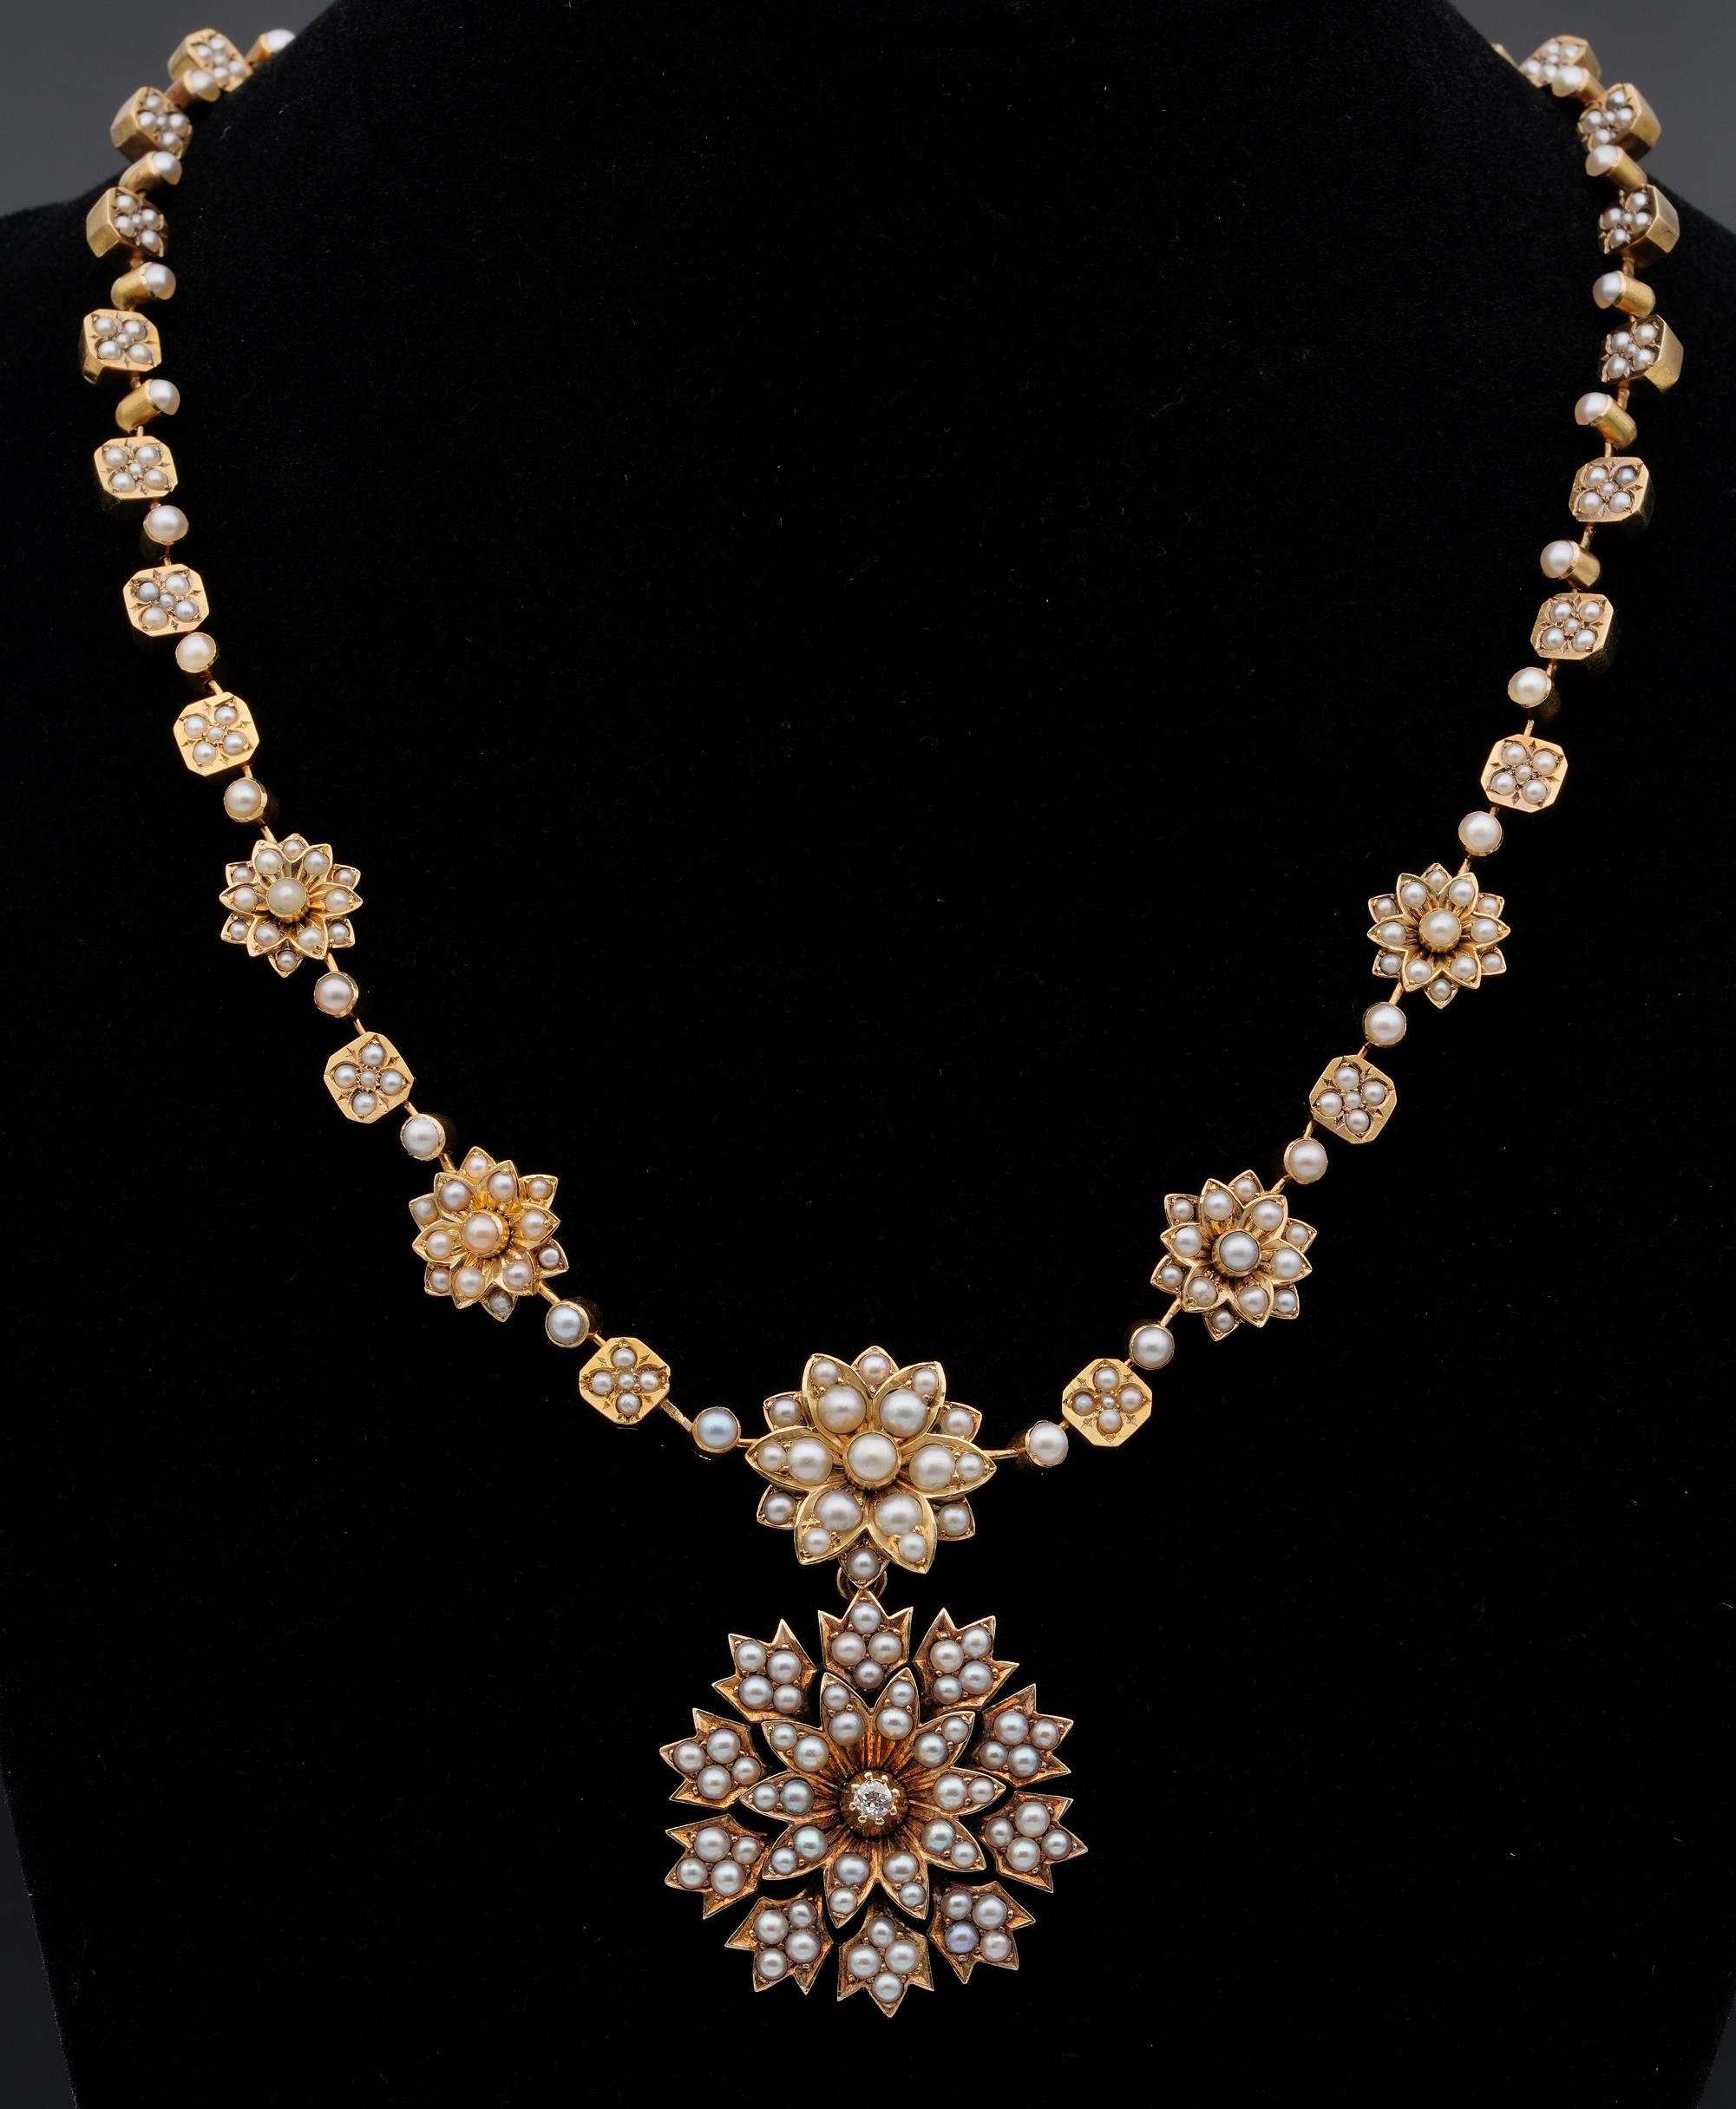 Victorian Statement Jewellery

Early Victorian !840 Ca
AN ANTIQUE PEARL AND DIAMOND DEMI PARURE, 19TH CENTURY in yellow gold, comprising a necklace and brooch, the necklace formed of a single row of square and floral links set with pearls, the